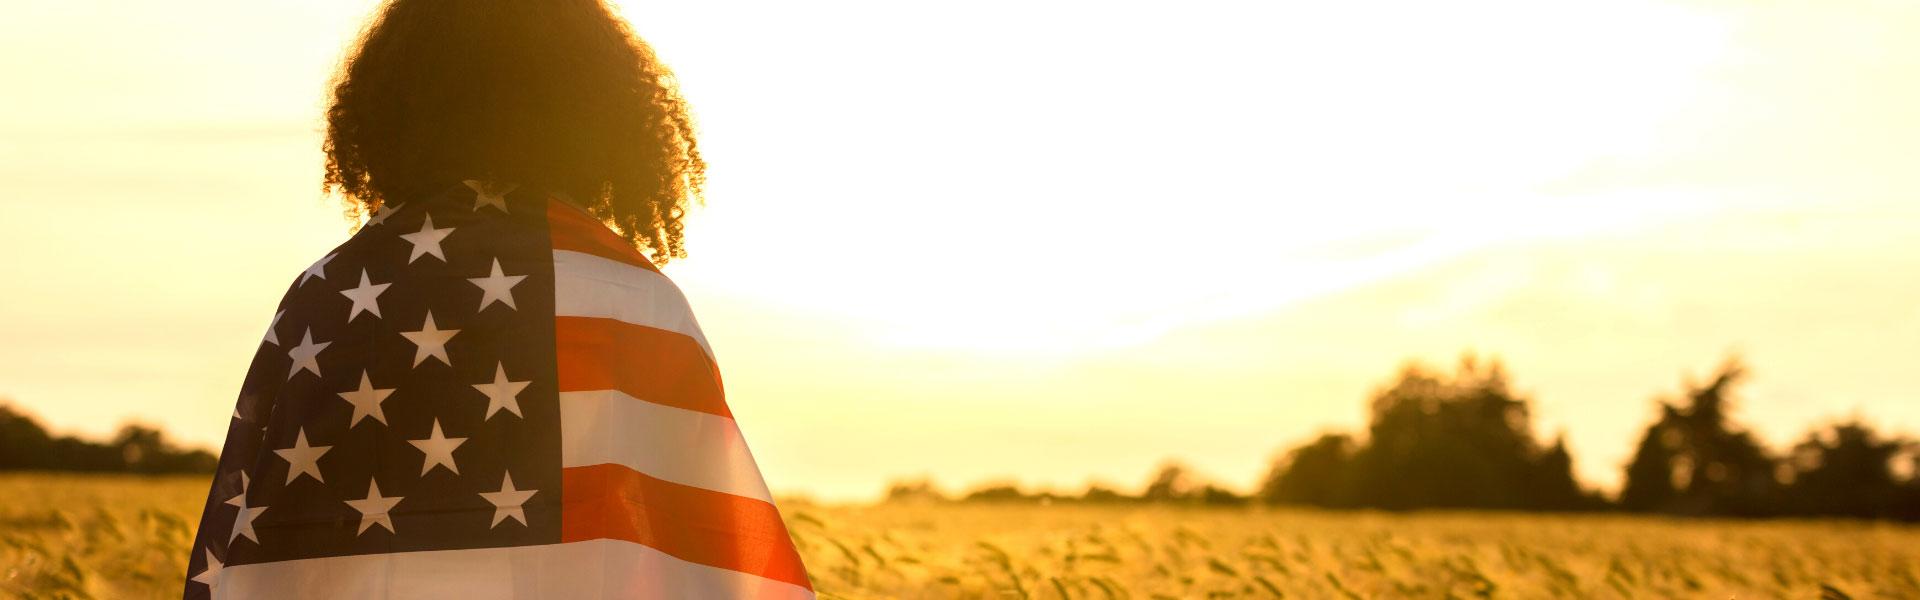 Woman wrapped in an American Flag standing in a wheat field at sunset